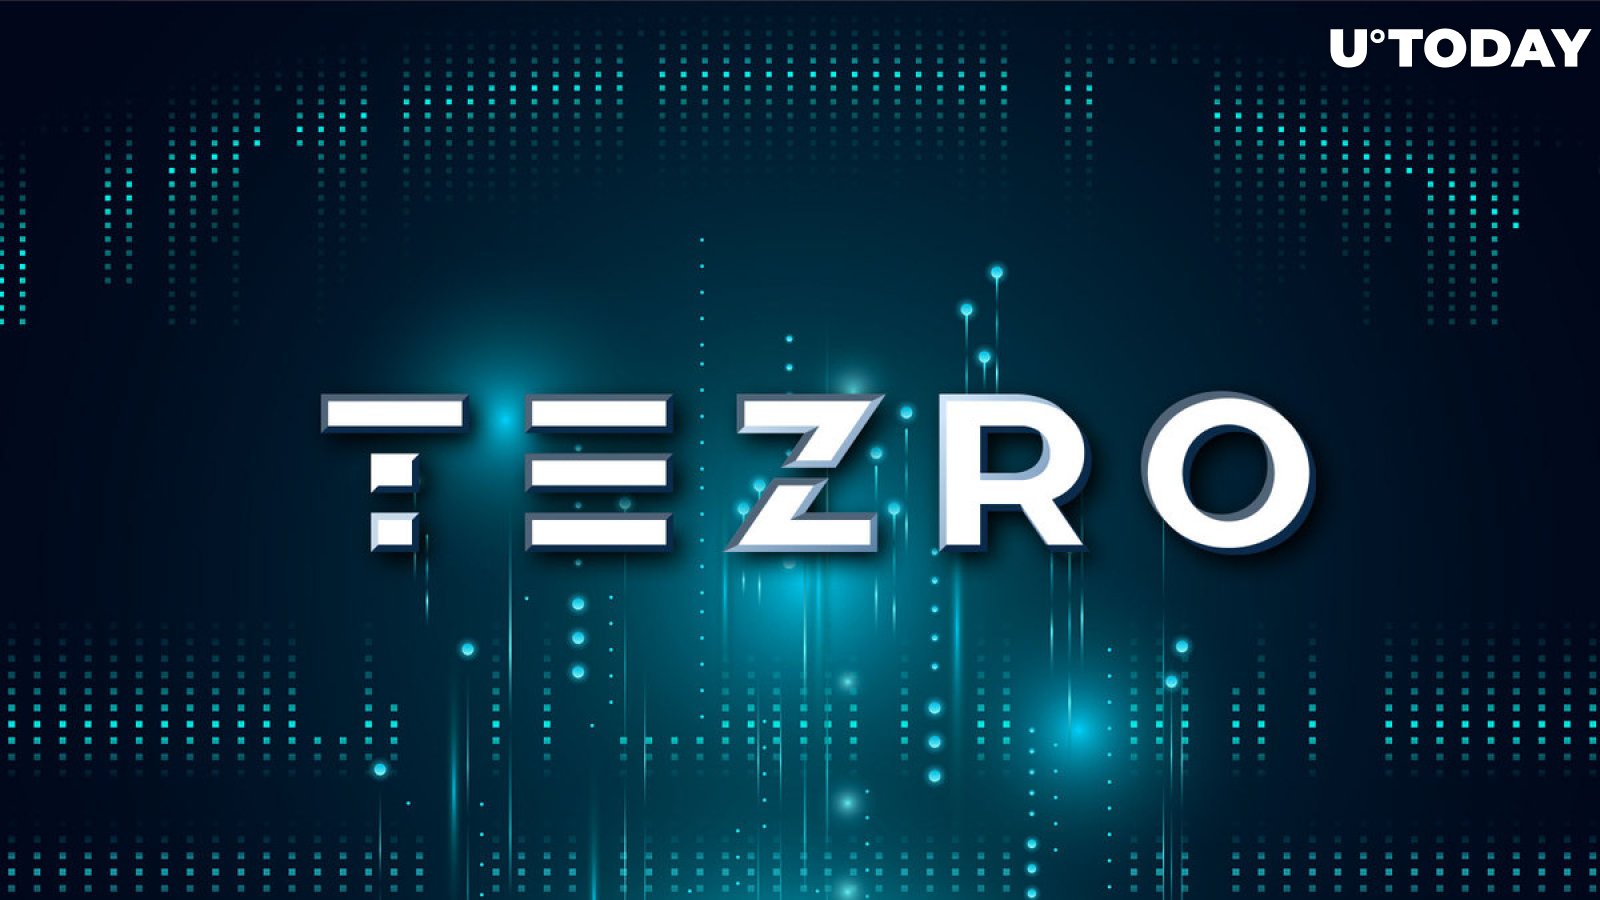 Tezro Unveils All-in-One Platform with Crypto Wallet and Messaging App